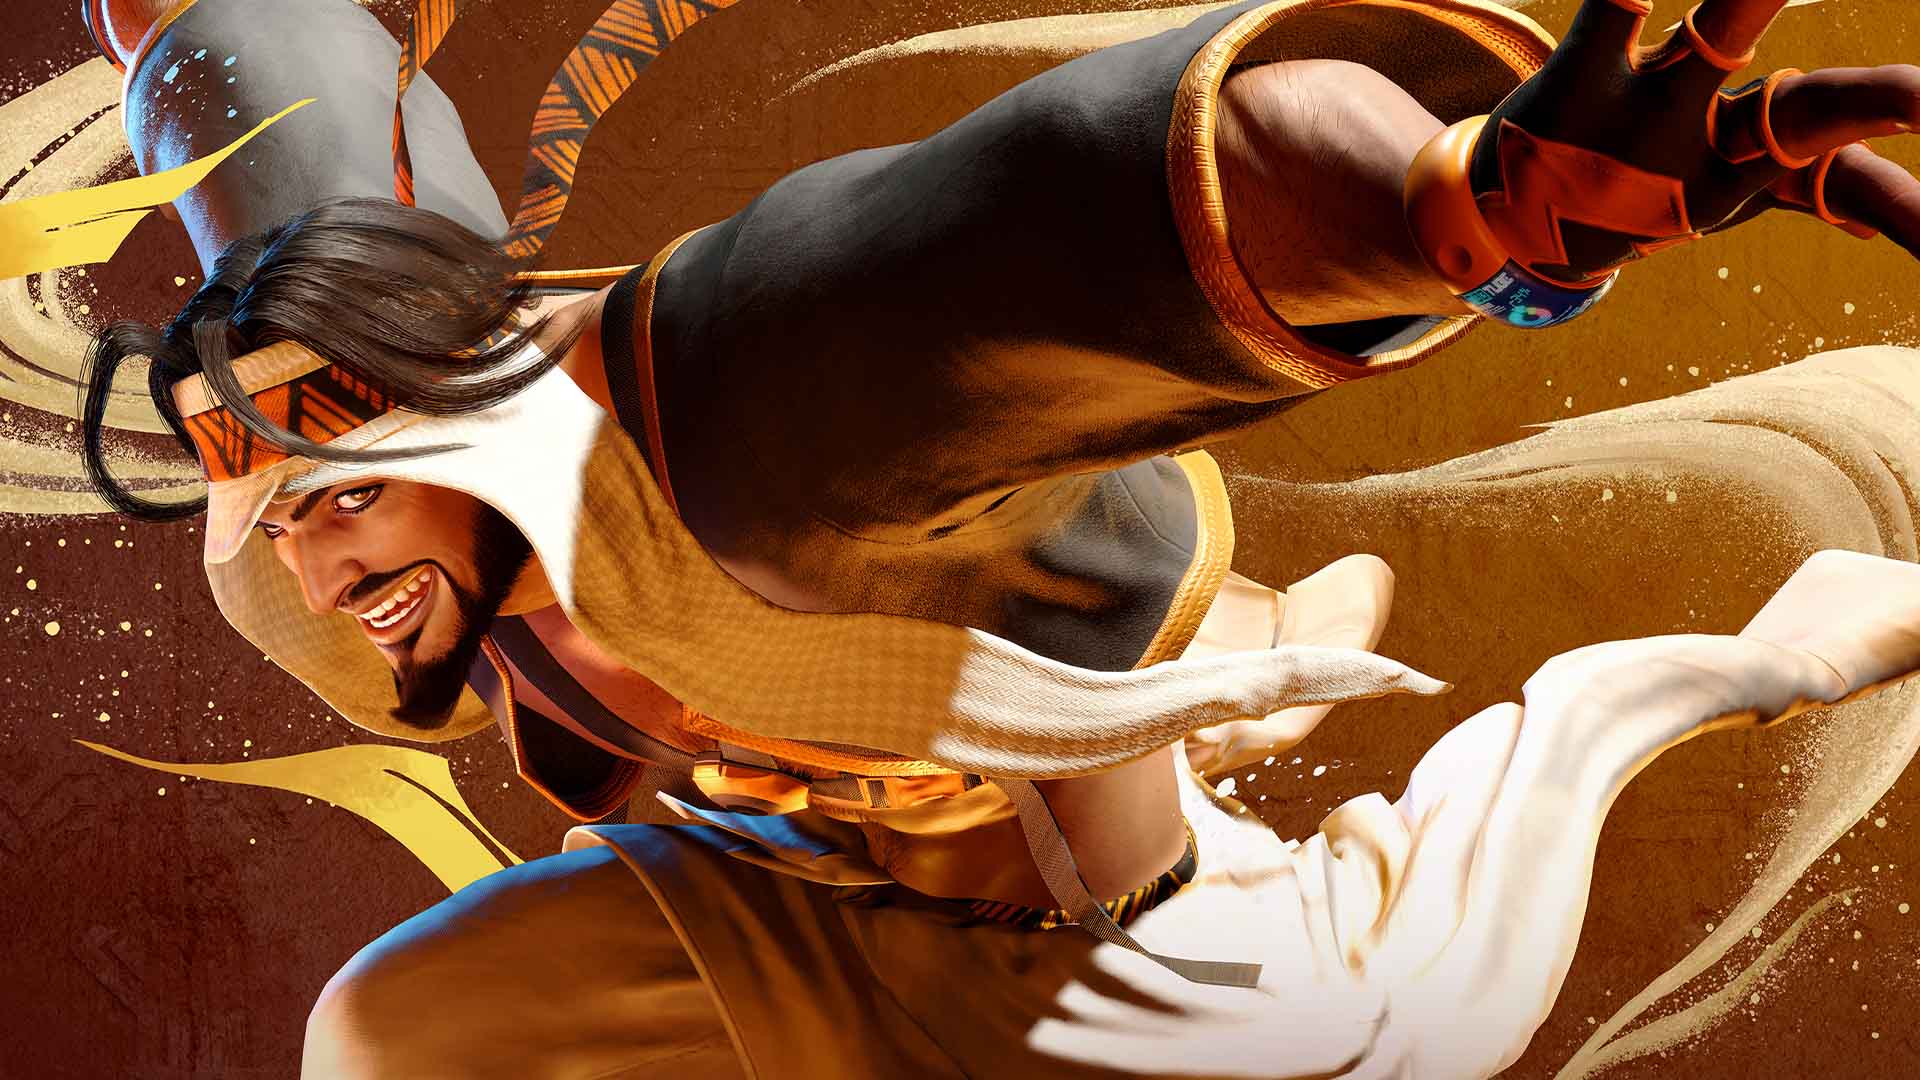 Street Fighter 6 first DLC character is Rashid, coming this month